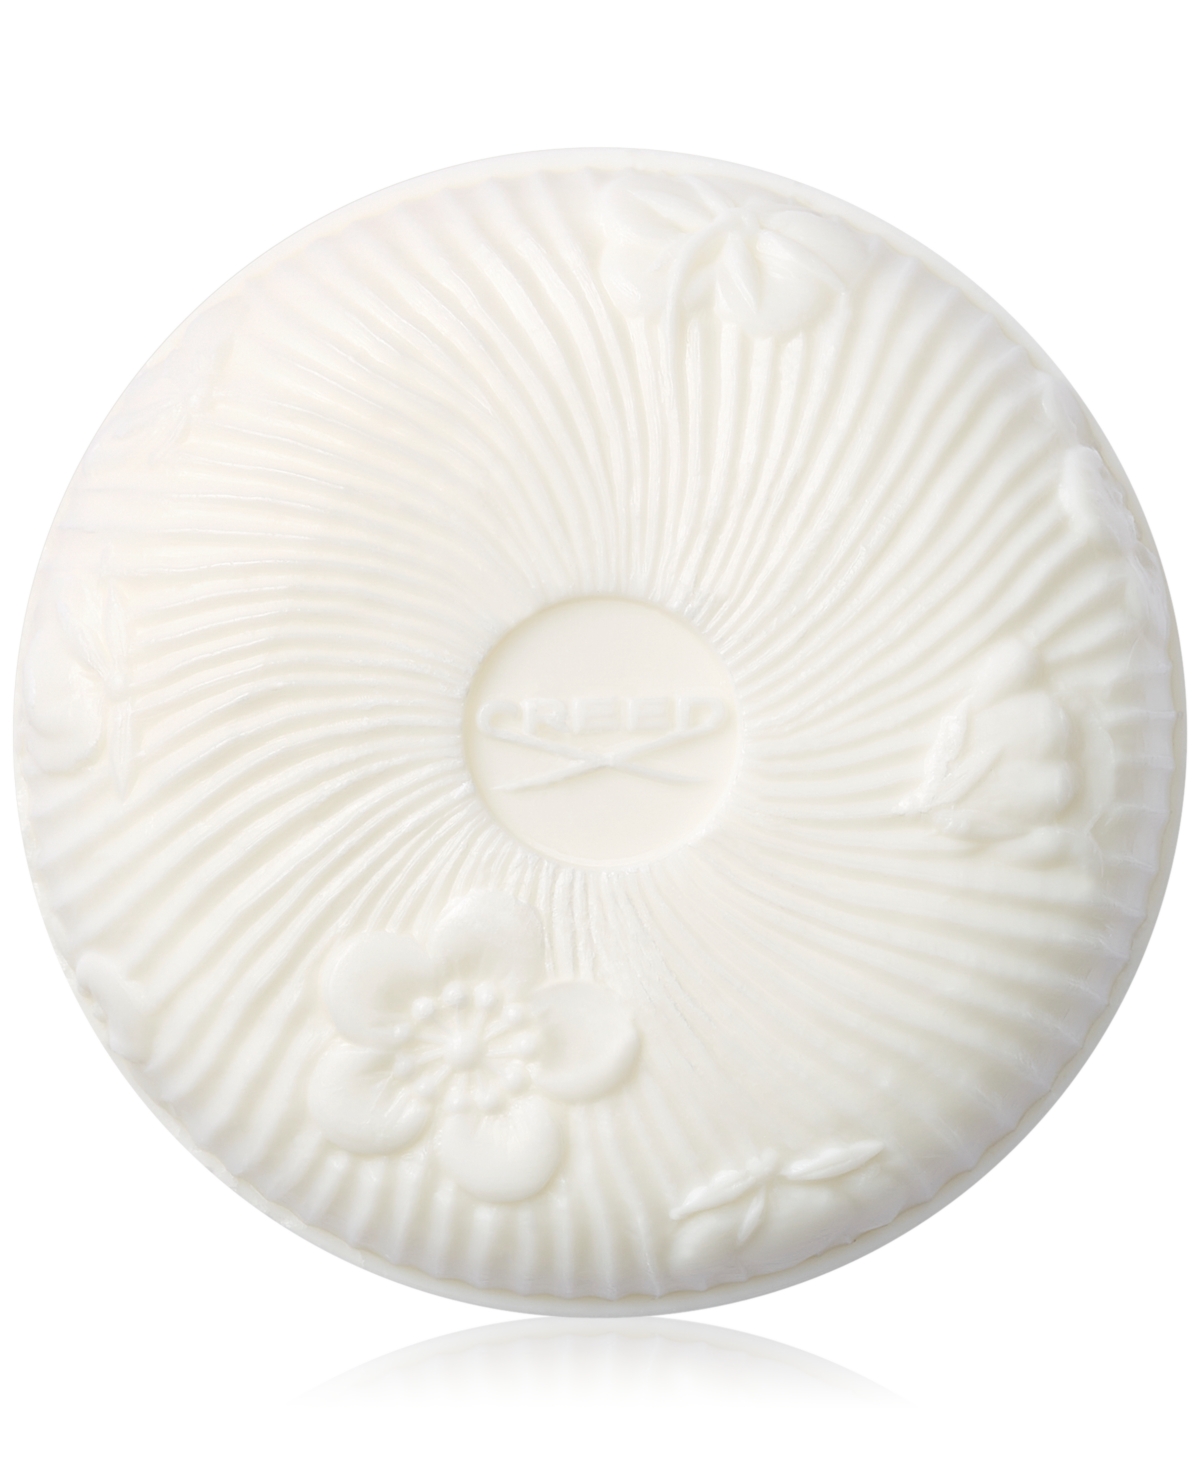 Aventus For Her Soap, 5.3 oz.